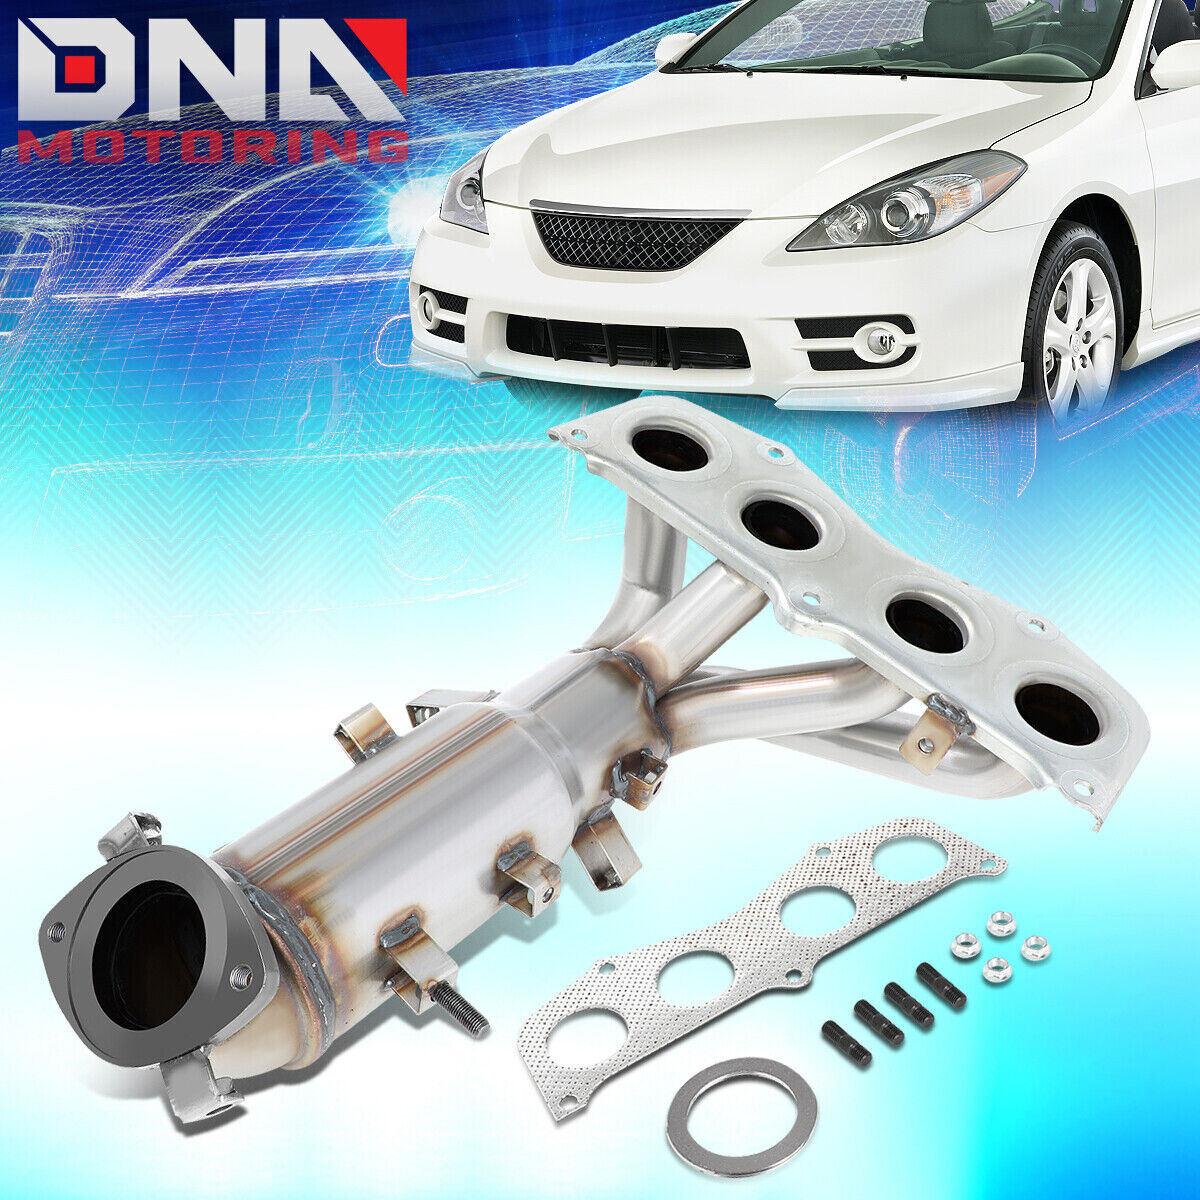 FOR 2002-2006 TOYOTA CAMRY 2.4L SOLARA CATALYTIC CONVERTER EXHAUST MANIFOLD KIT